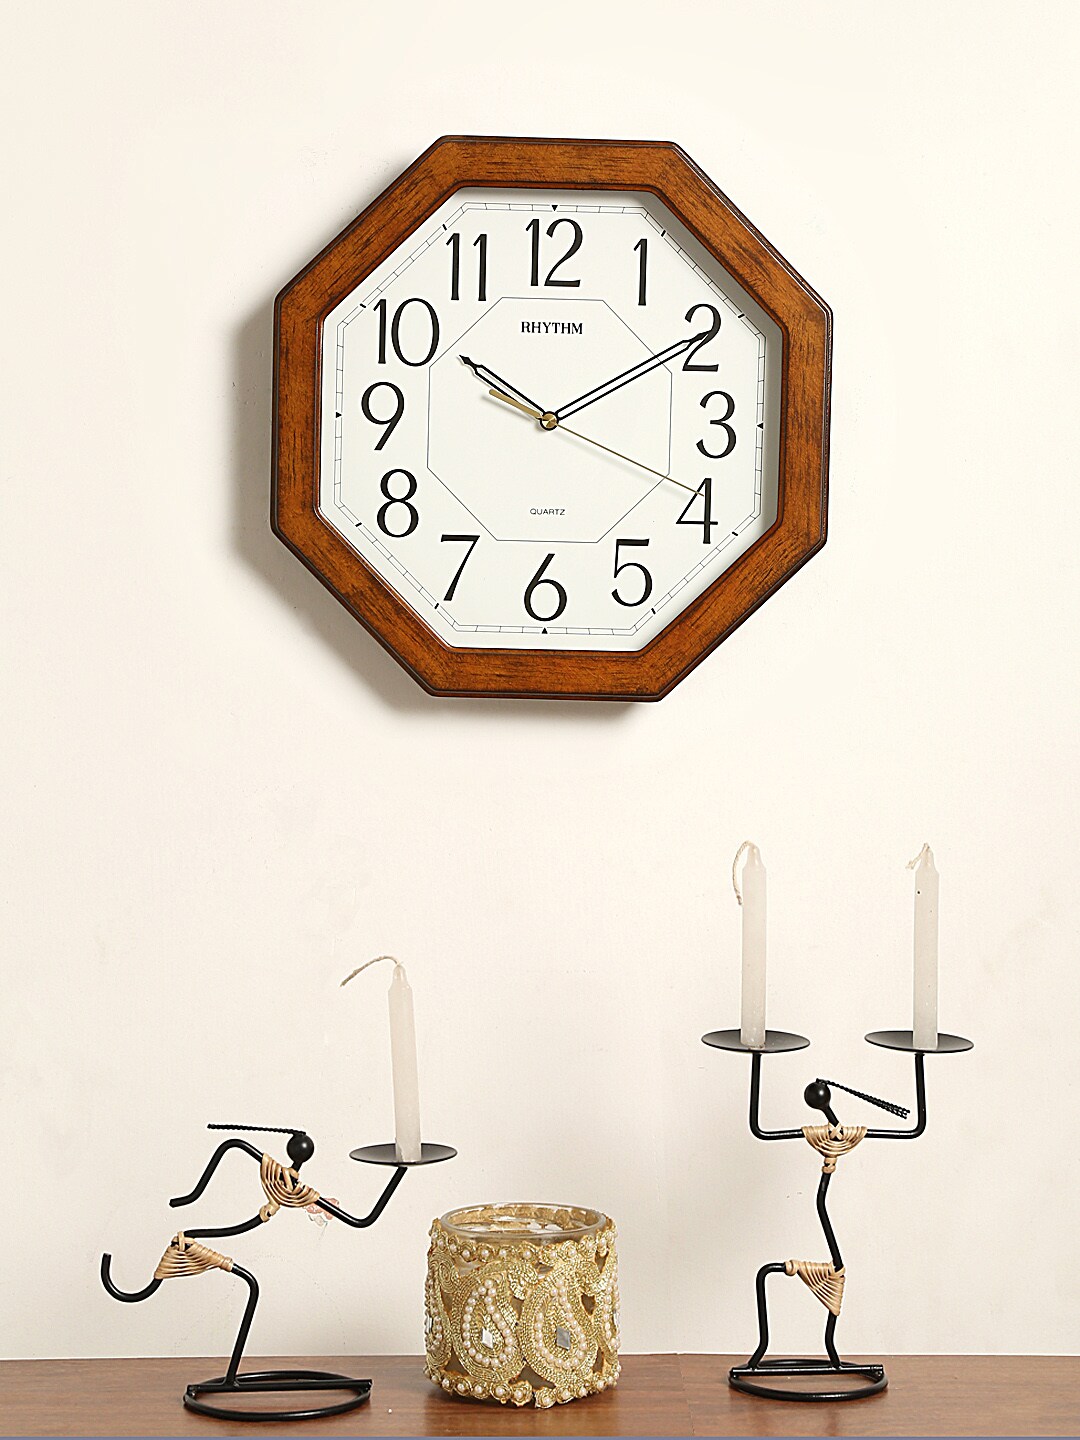 Rhythm Unisex White Handcrafted Geometric Solid Analogue Wall Clock CMG944NR06 Price in India